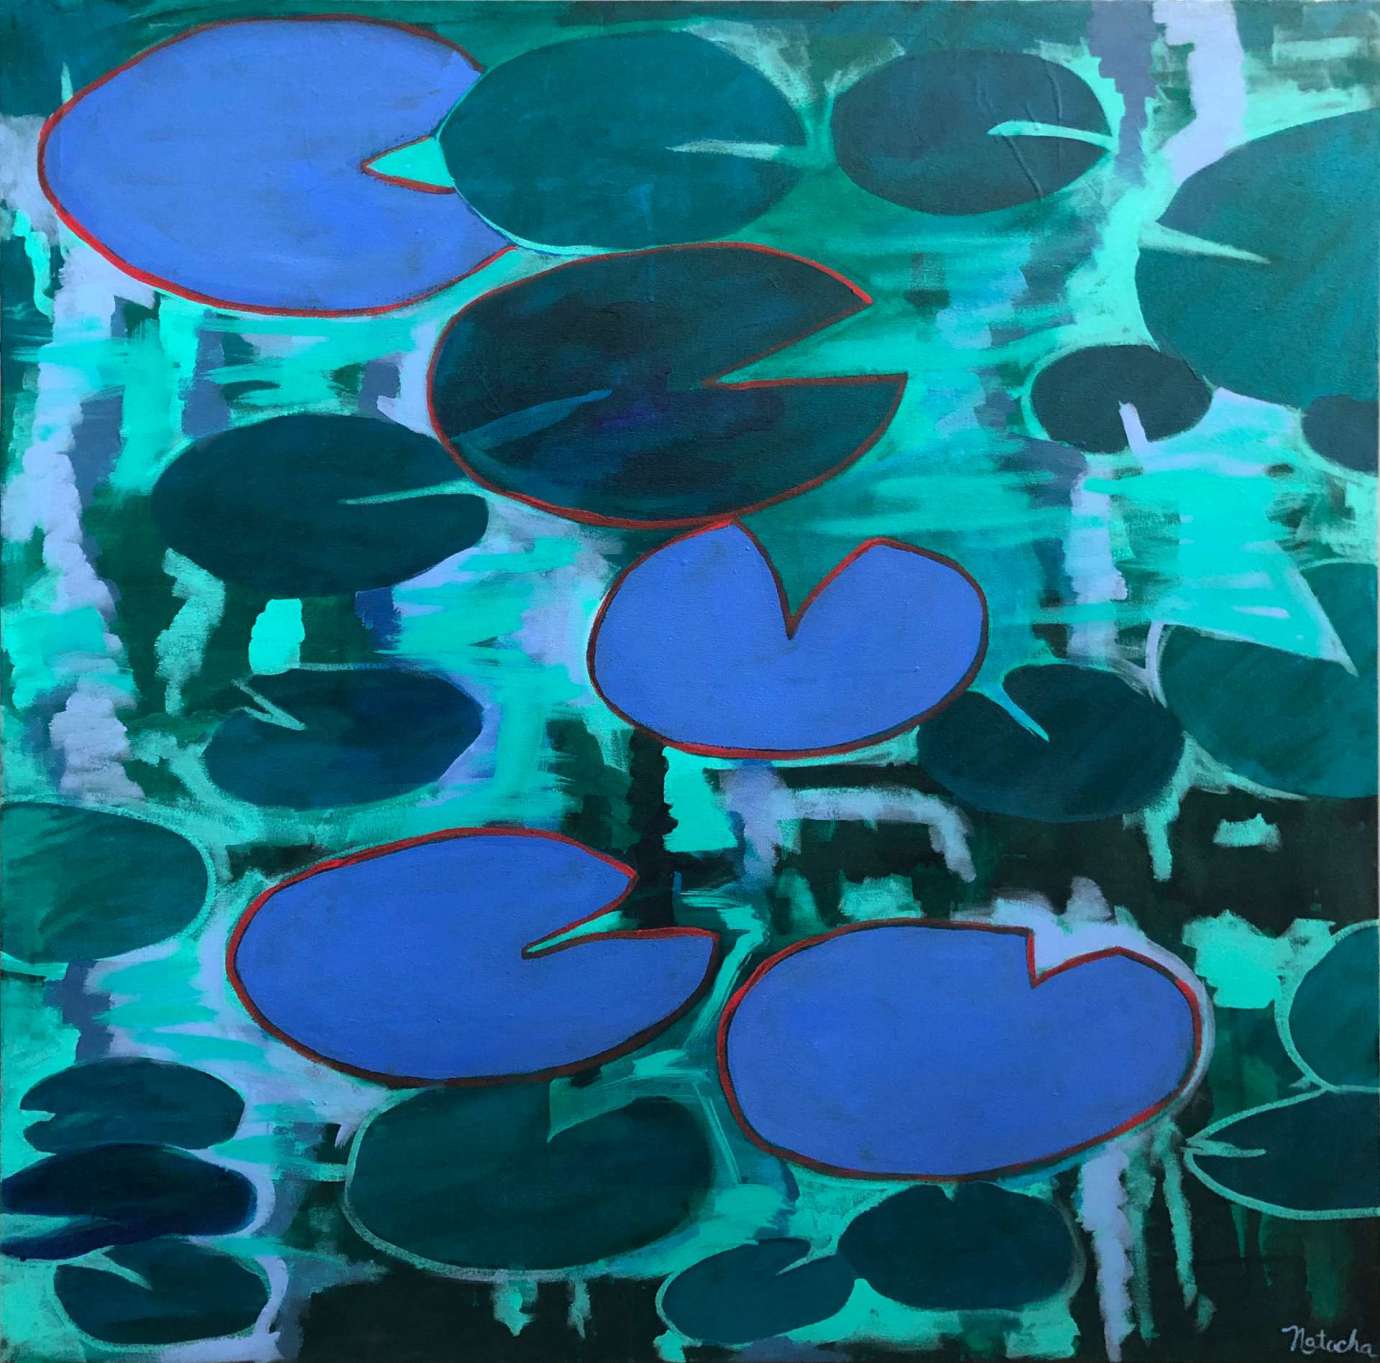 Abstract artwork of a lily pond by Natacha Sochat